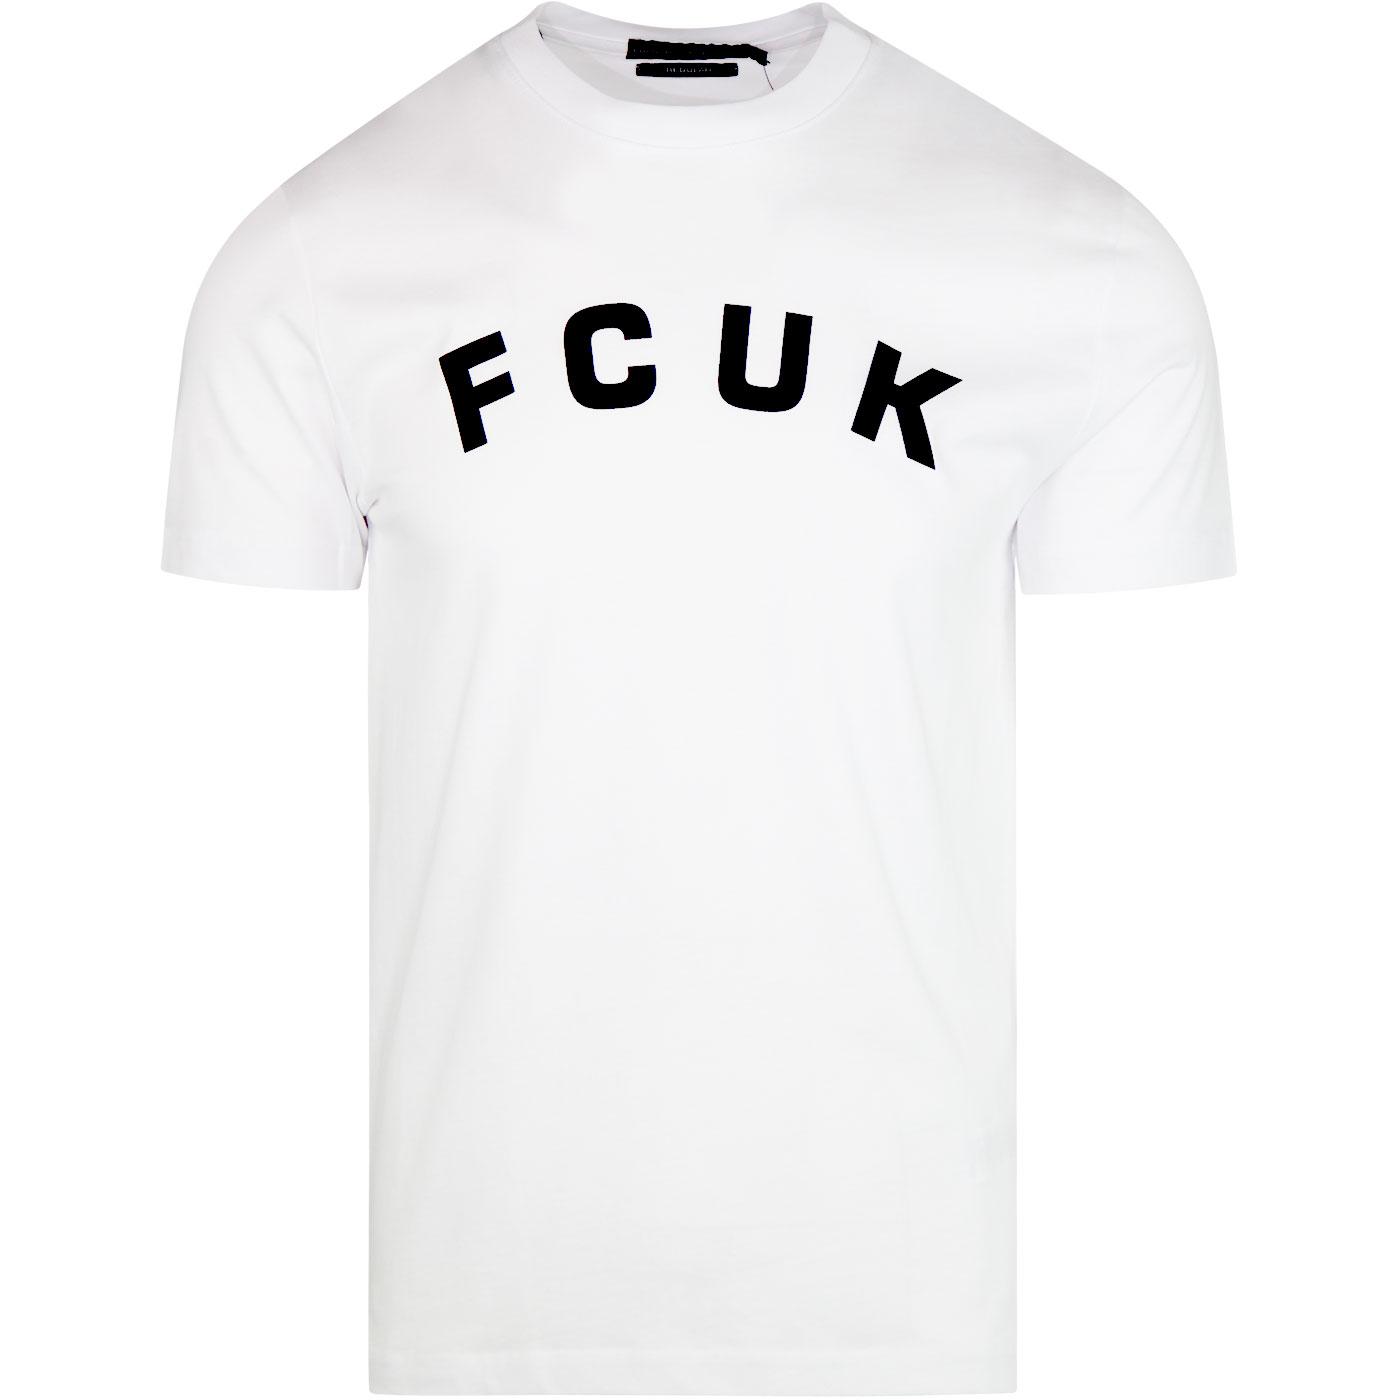 FRENCH CONNECTION FCUK Arched Crew Slogan T-shirt